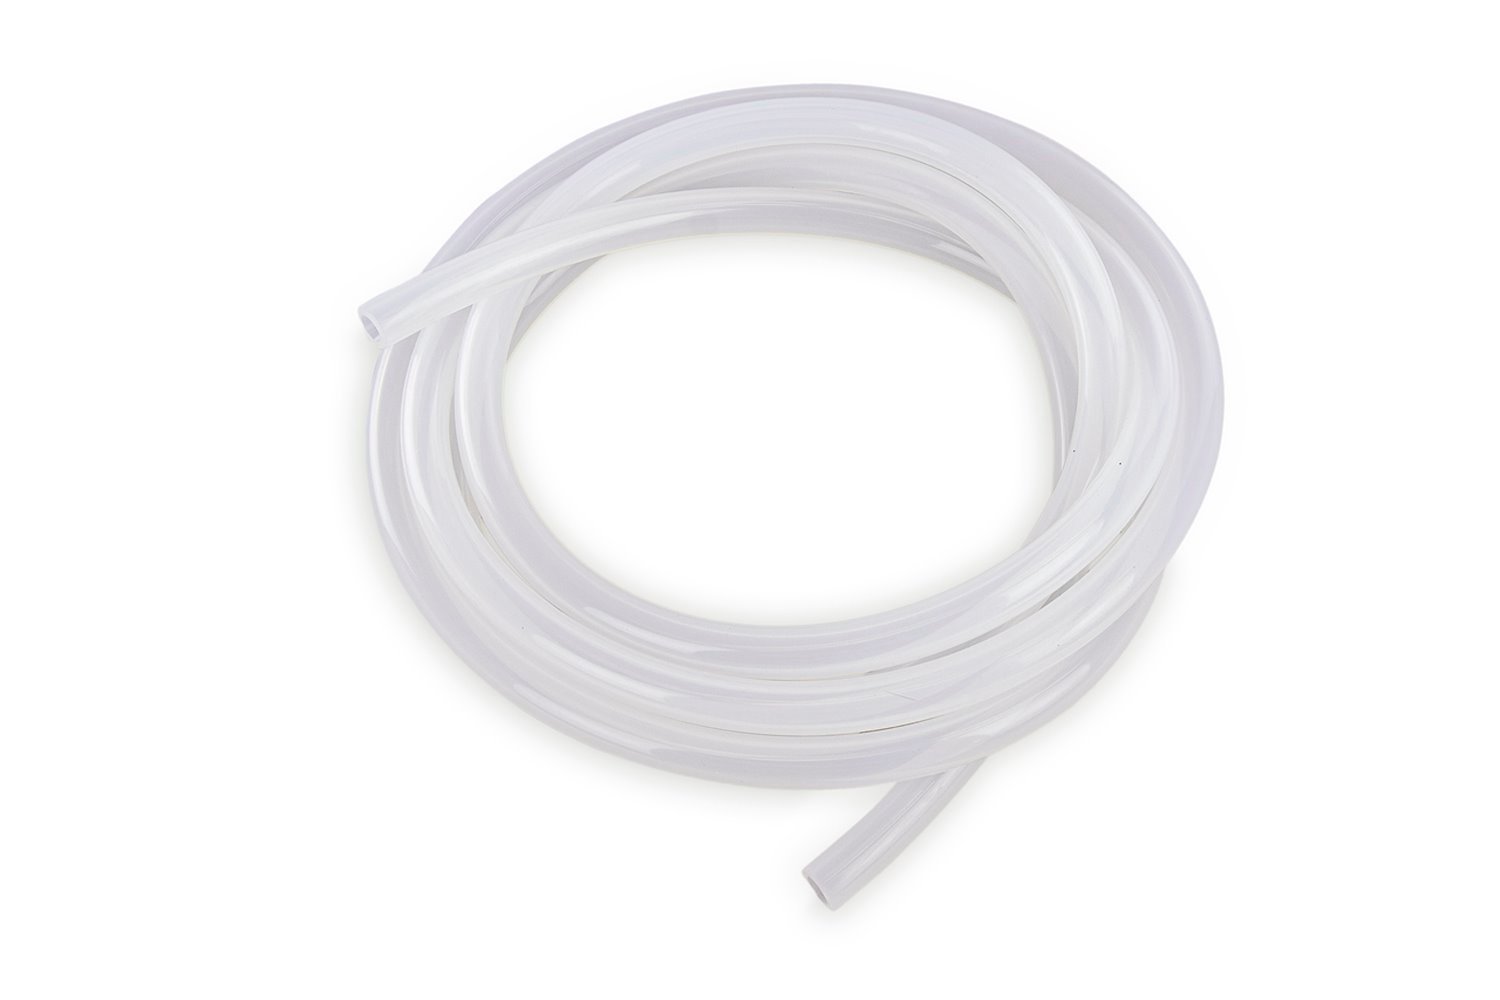 HTSVH3TW-CLEARx25 High-Temperature Silicone Vacuum Hose Tubing, 1/8 in. ID, 25 ft. Roll, Clear